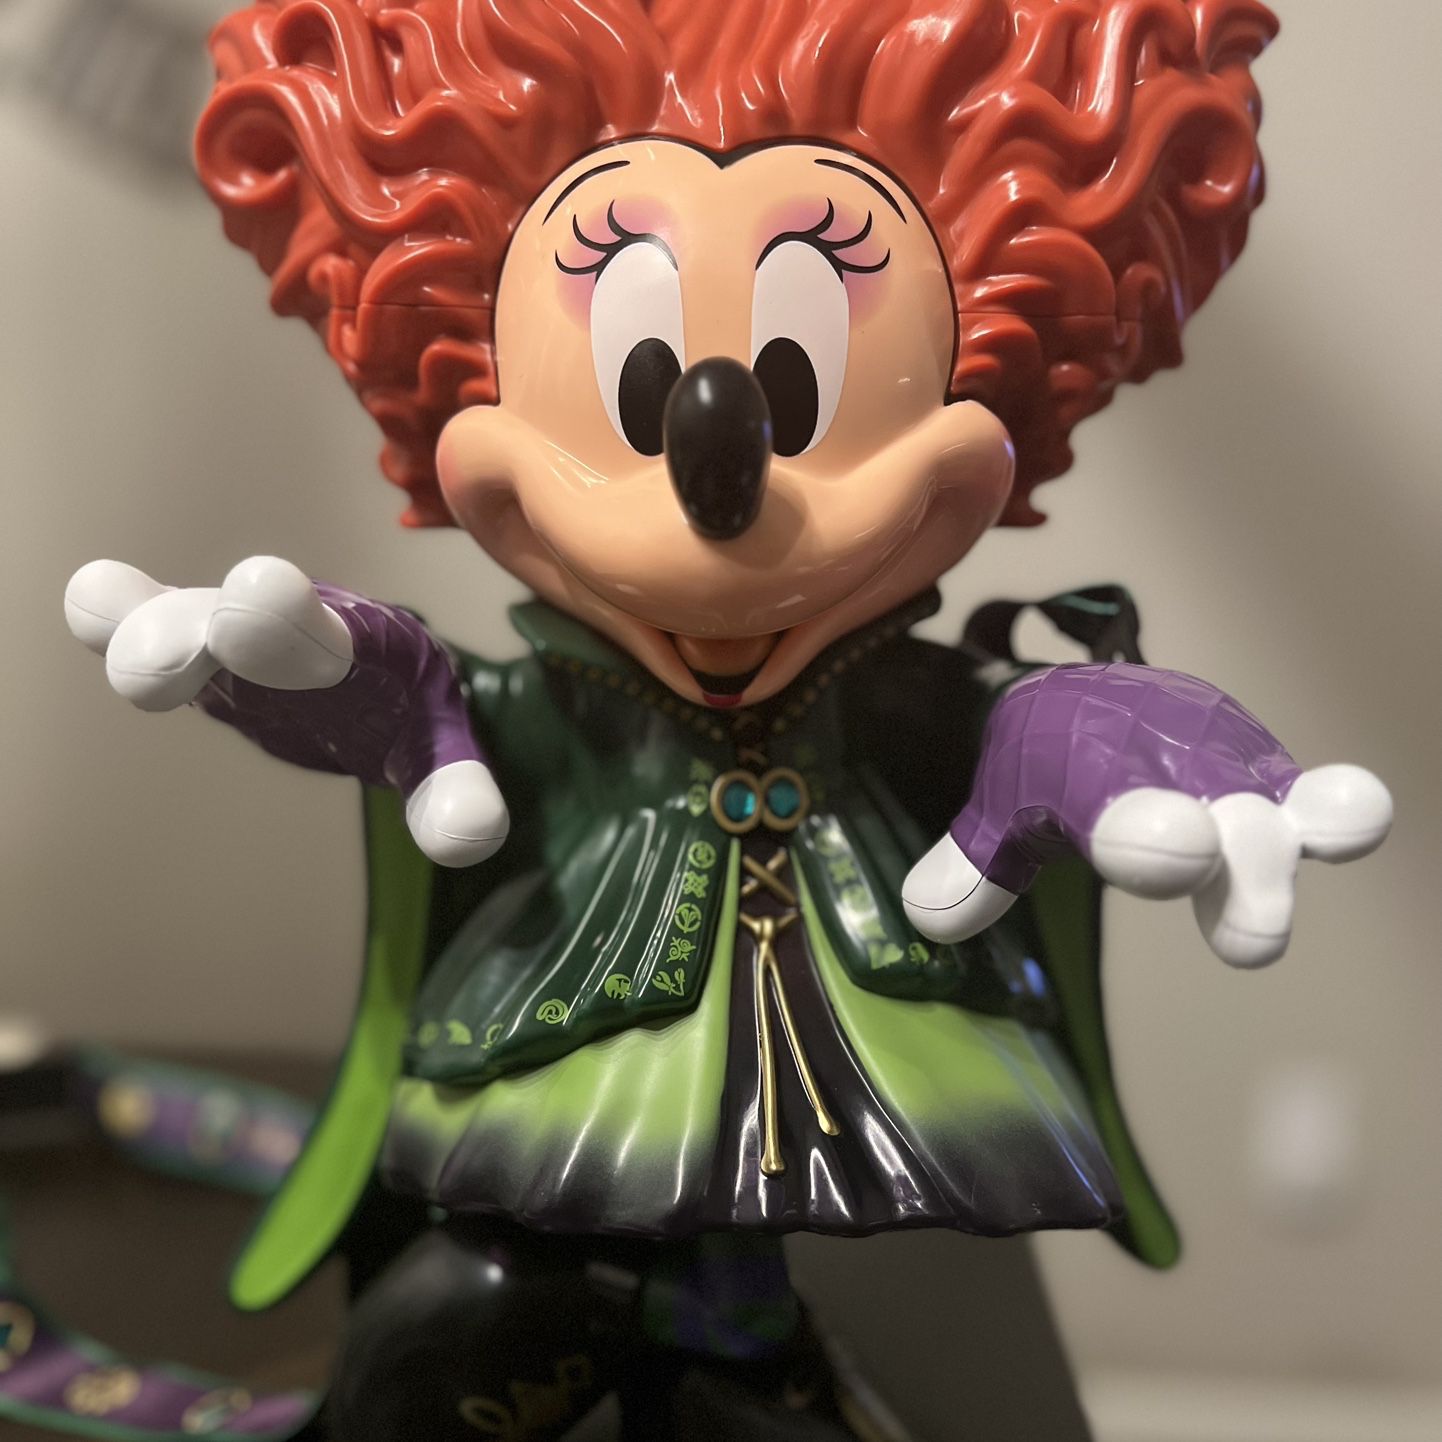 New Hocus Pocus Sipper Featuring Minnie Mouse as Winifred